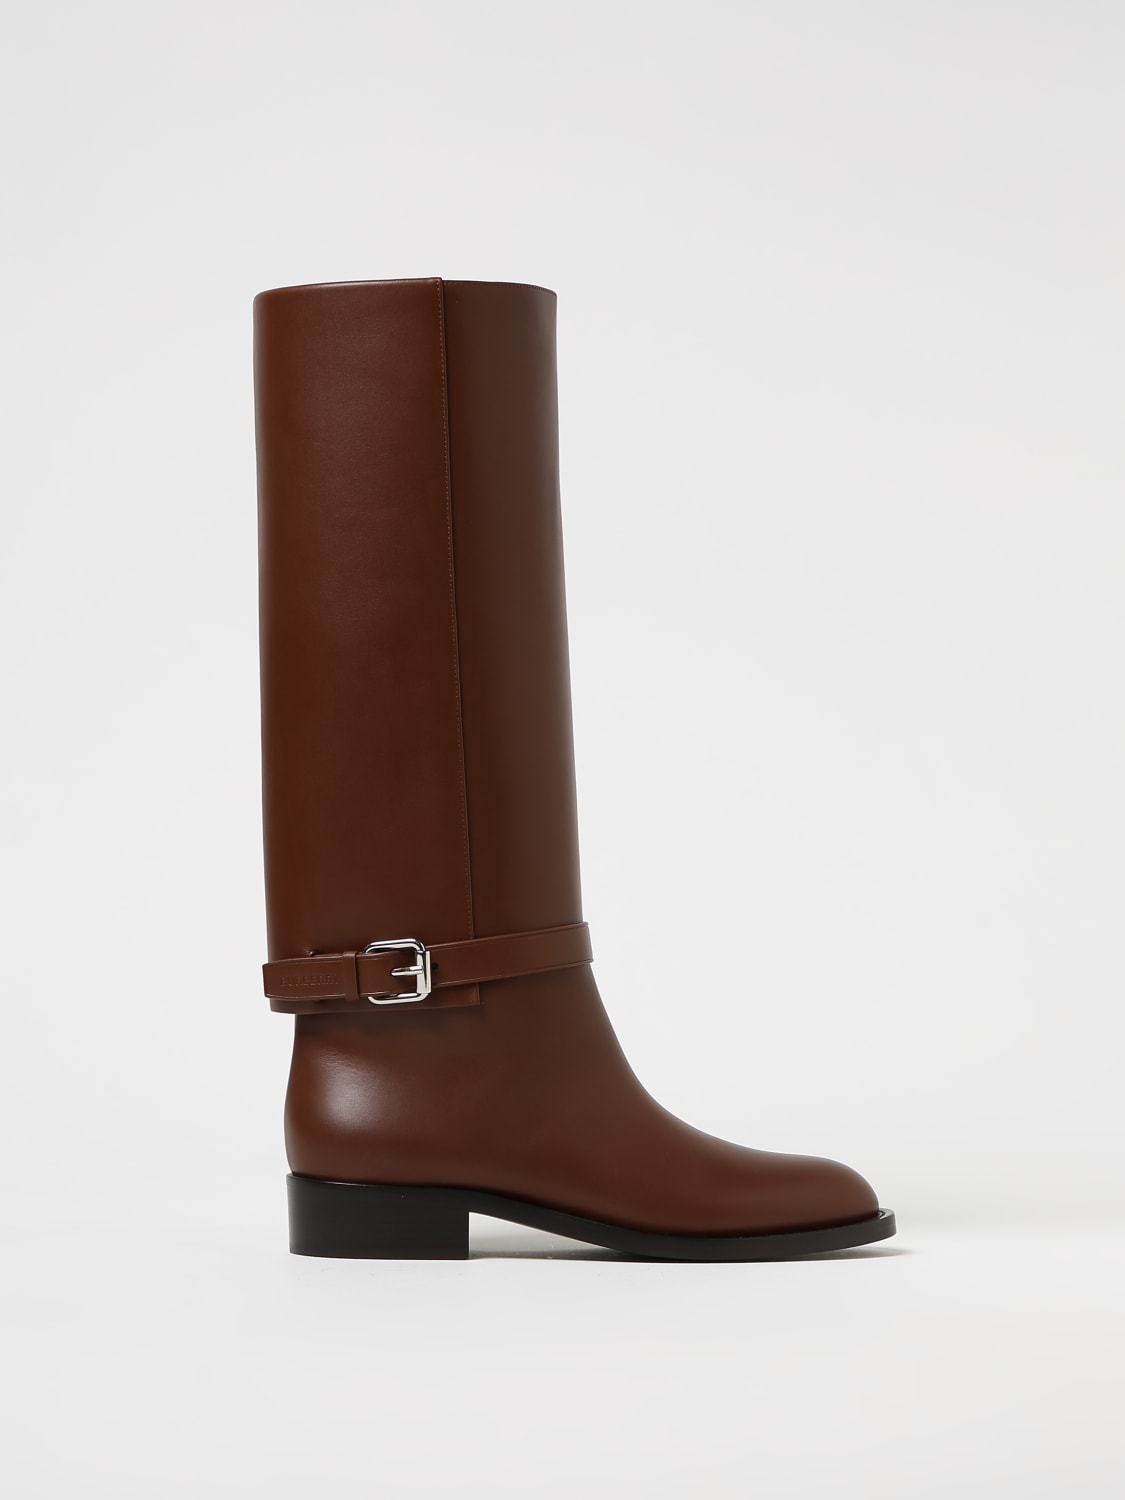 Burberry leather boots with strap